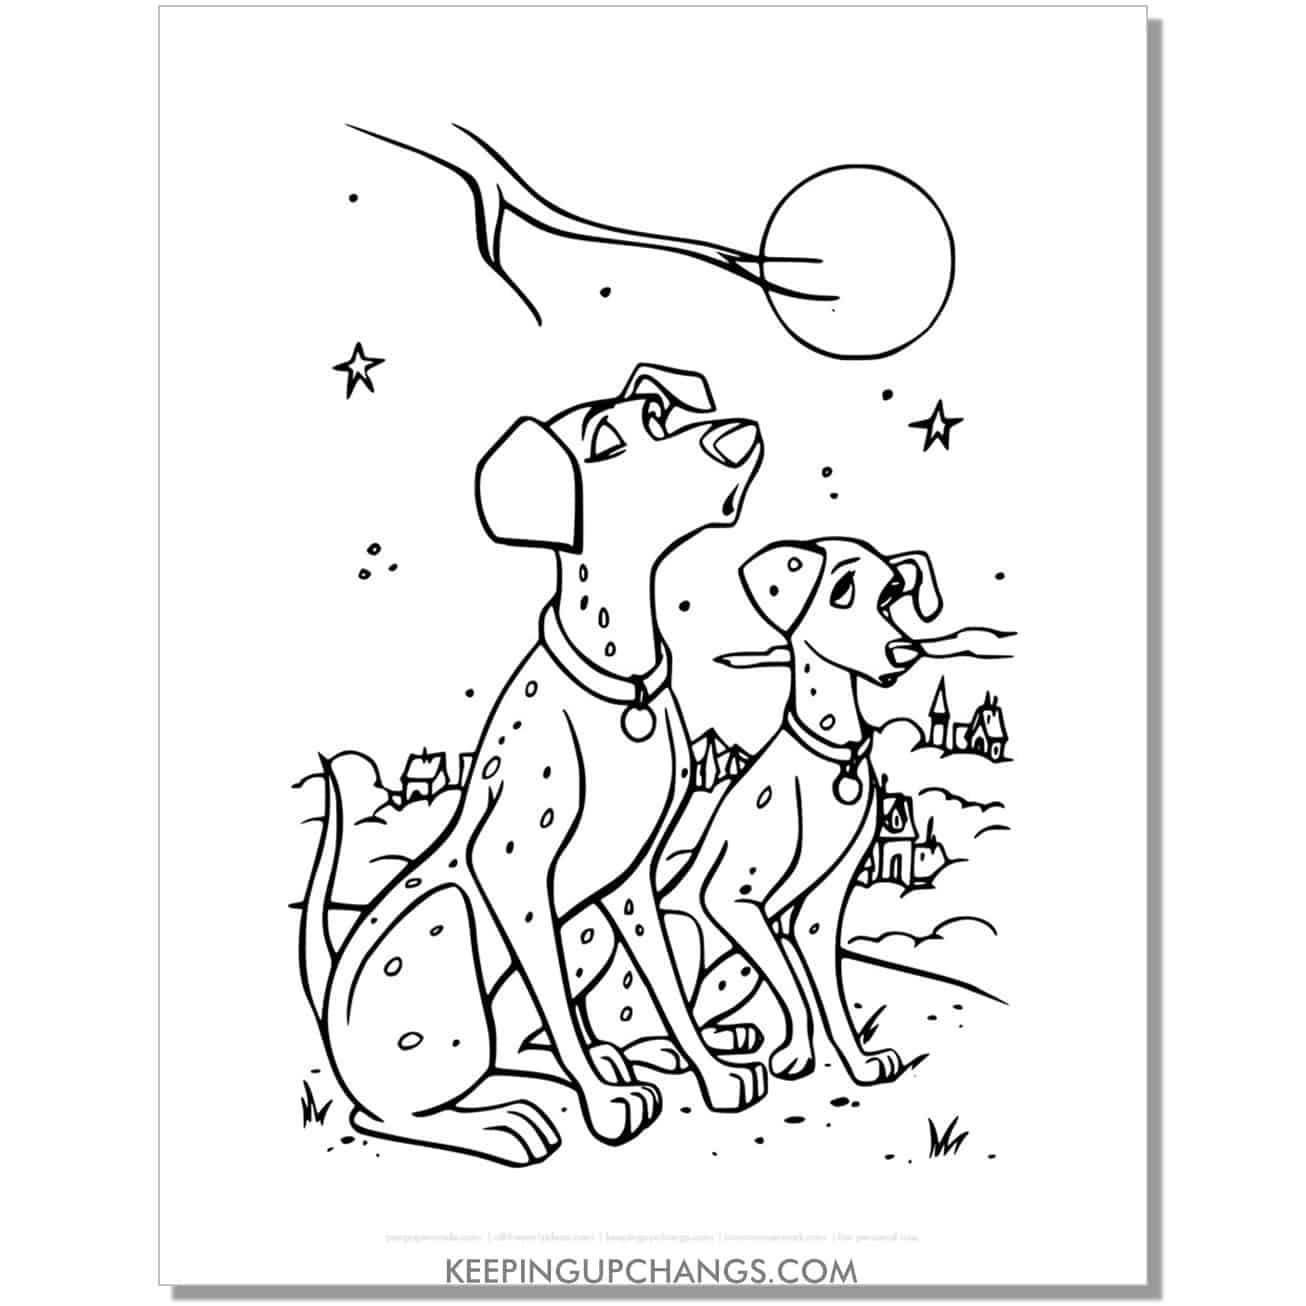 free pongo howling with perdita at night 101 dalmations coloring page, sheet.